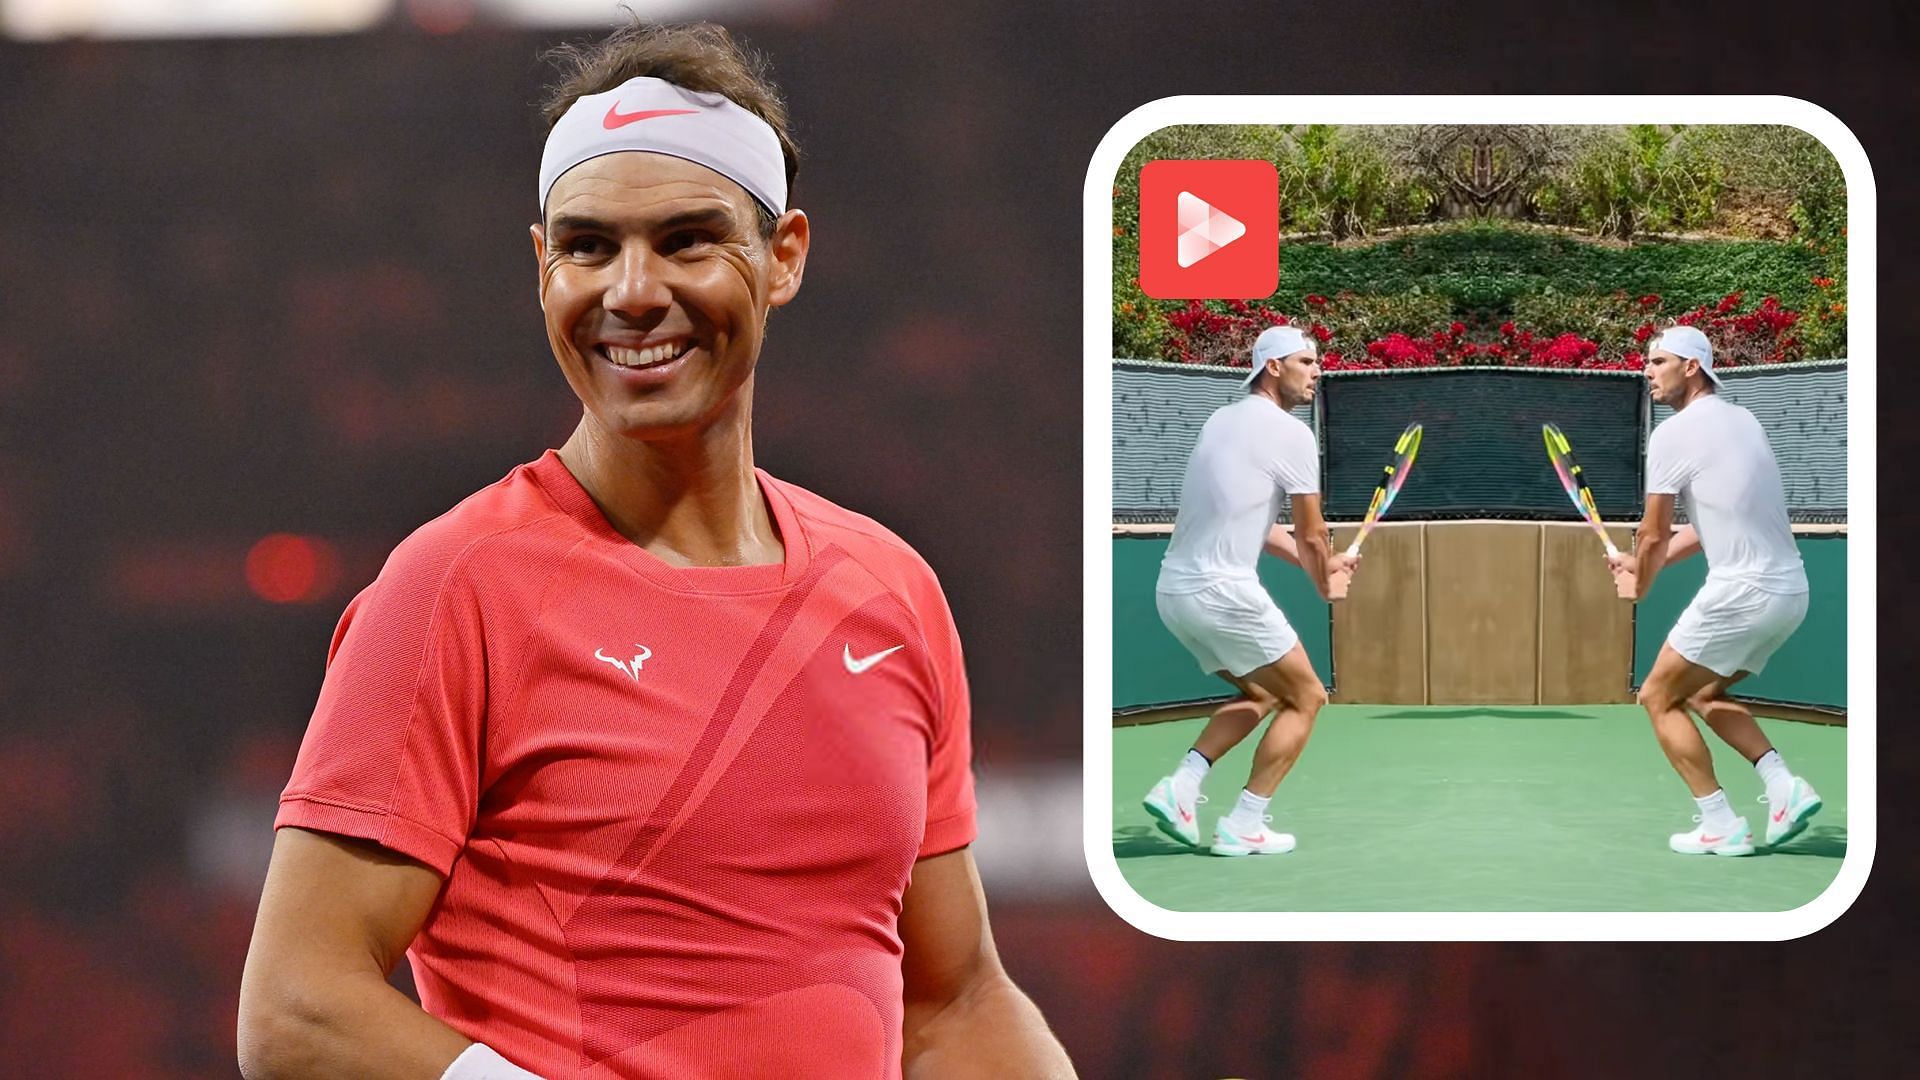 WATCH: Rafael Nadal gives a peek into his claycourt training from his time in Indian Wells, as he gears up for a potential return in Monte-Carlo